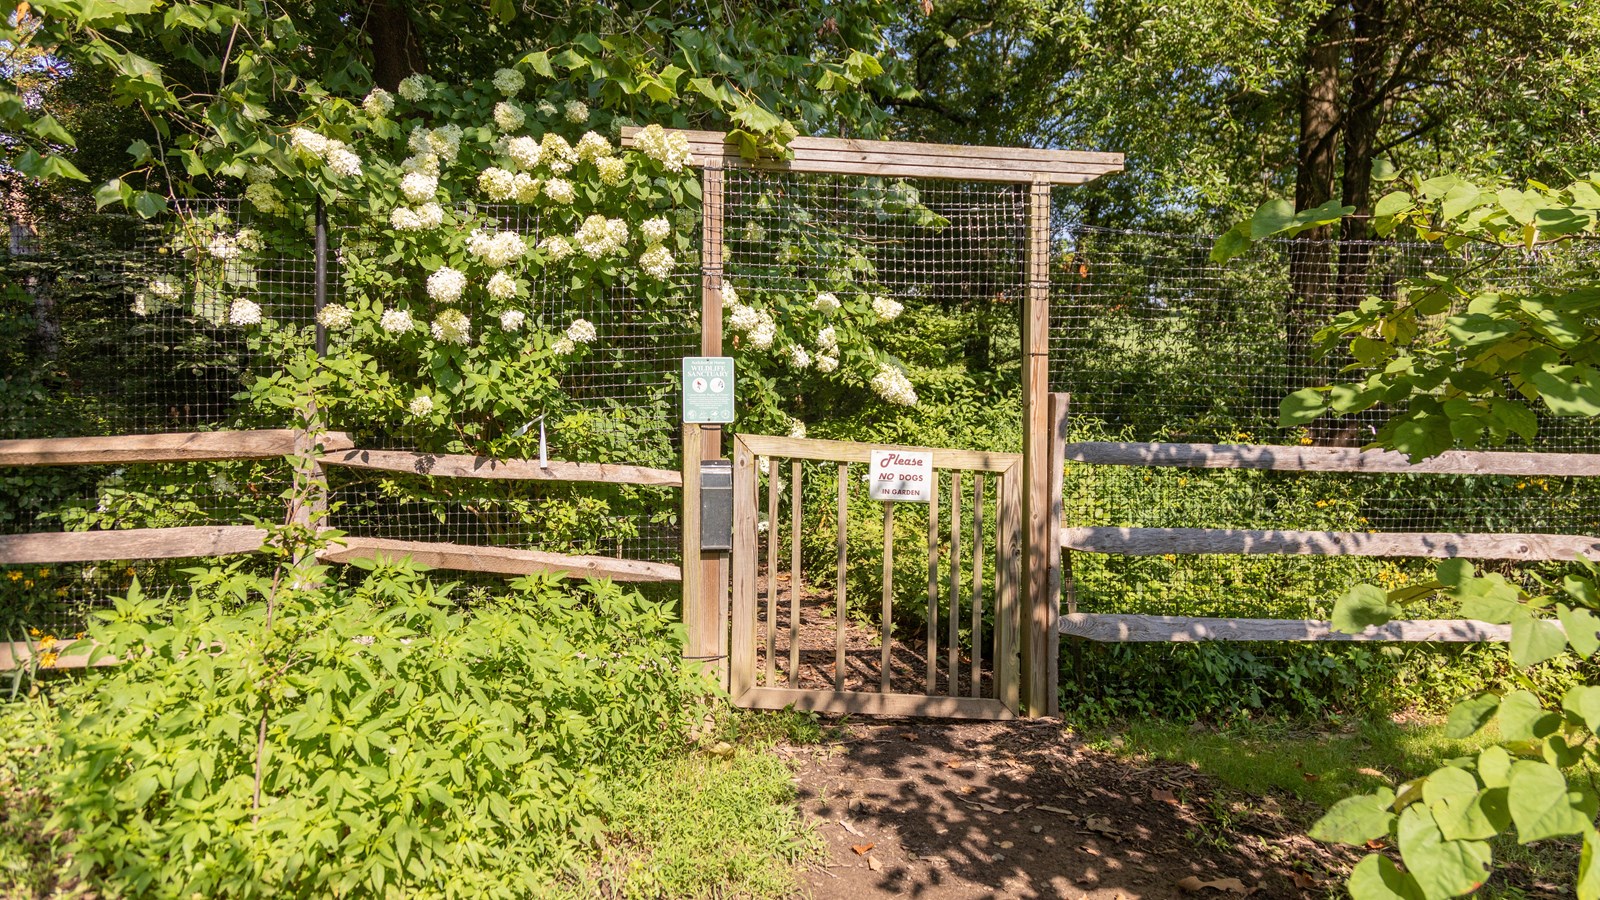 Gate with split rail fence on either side leads to the Woodland Garden.